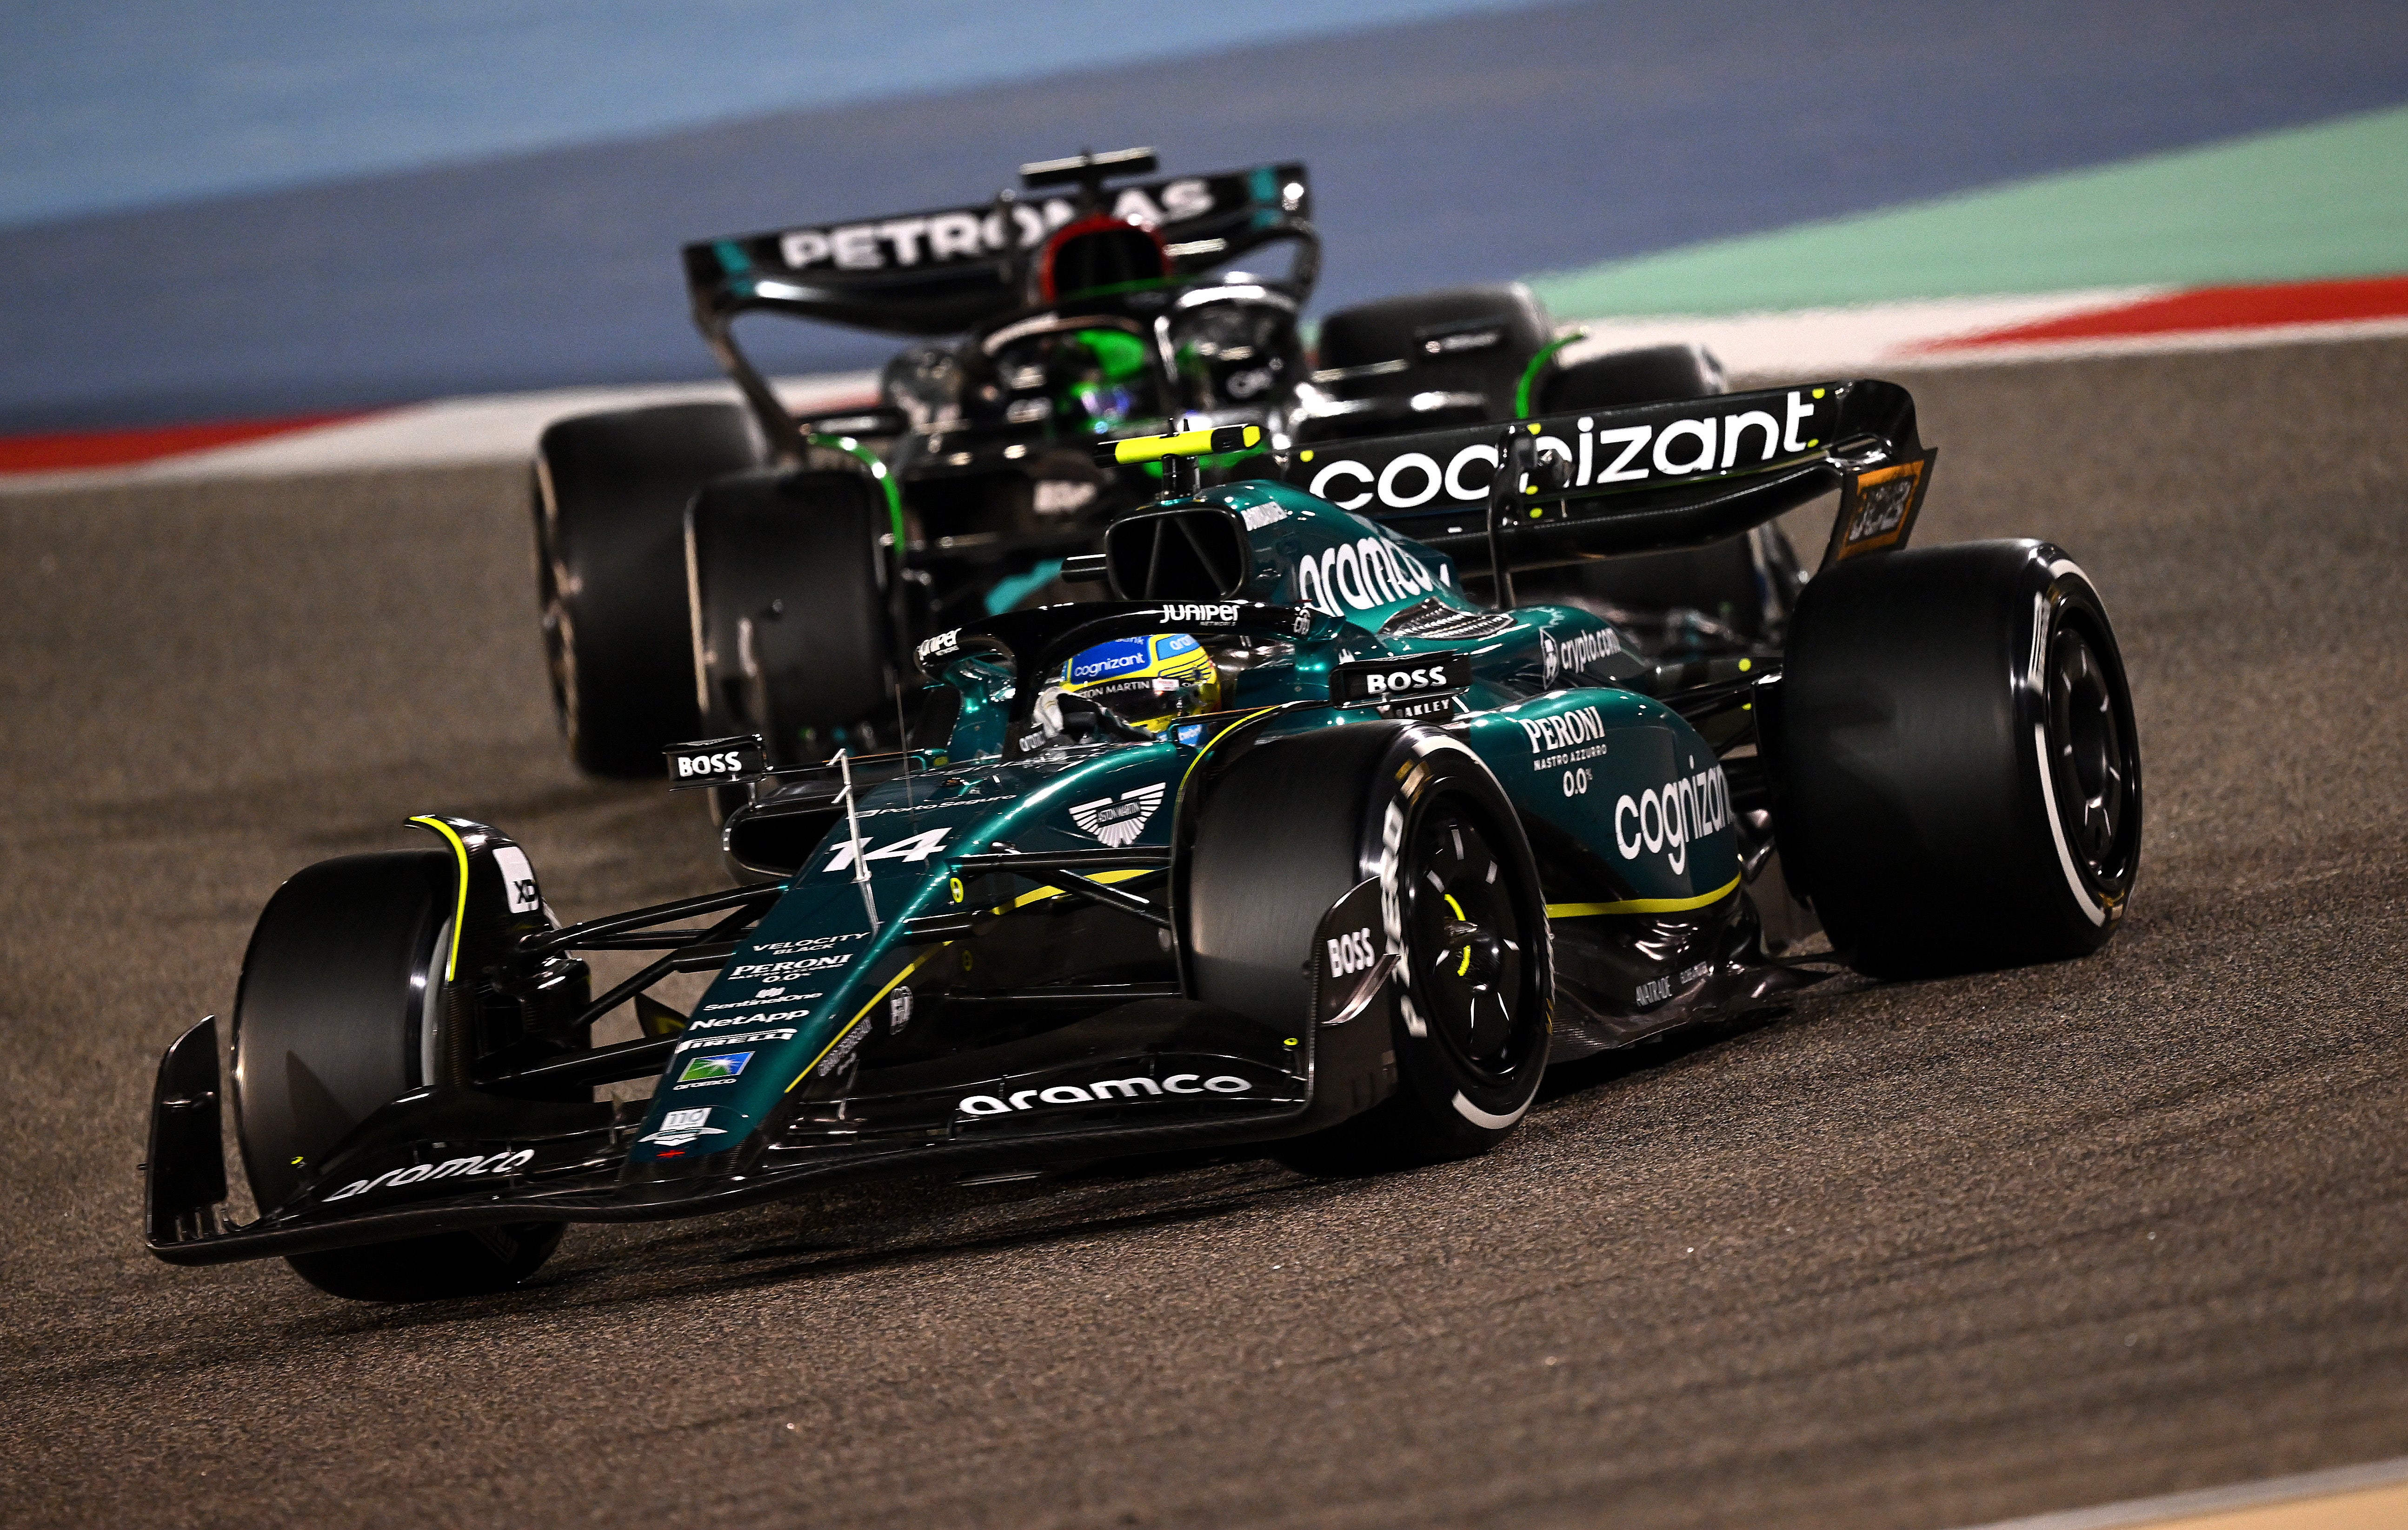 Aston Martin have leapfrogged Mercedes and claimed a podium in Bahrain